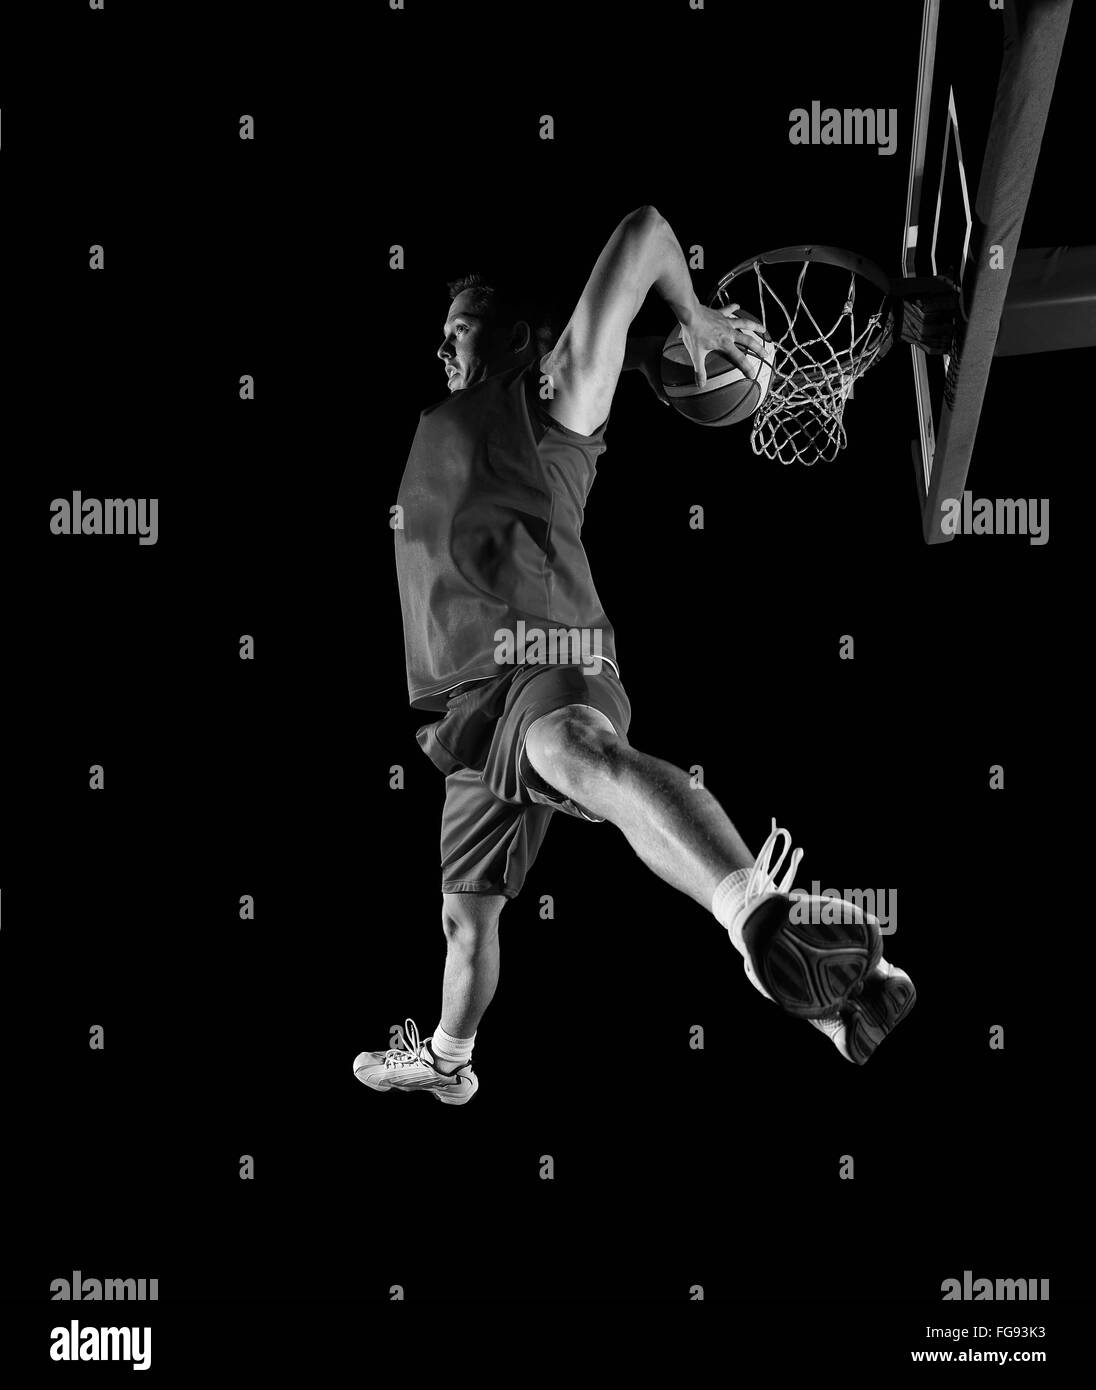 Basketball wallpaper Black and White Stock Photos  Images  Alamy